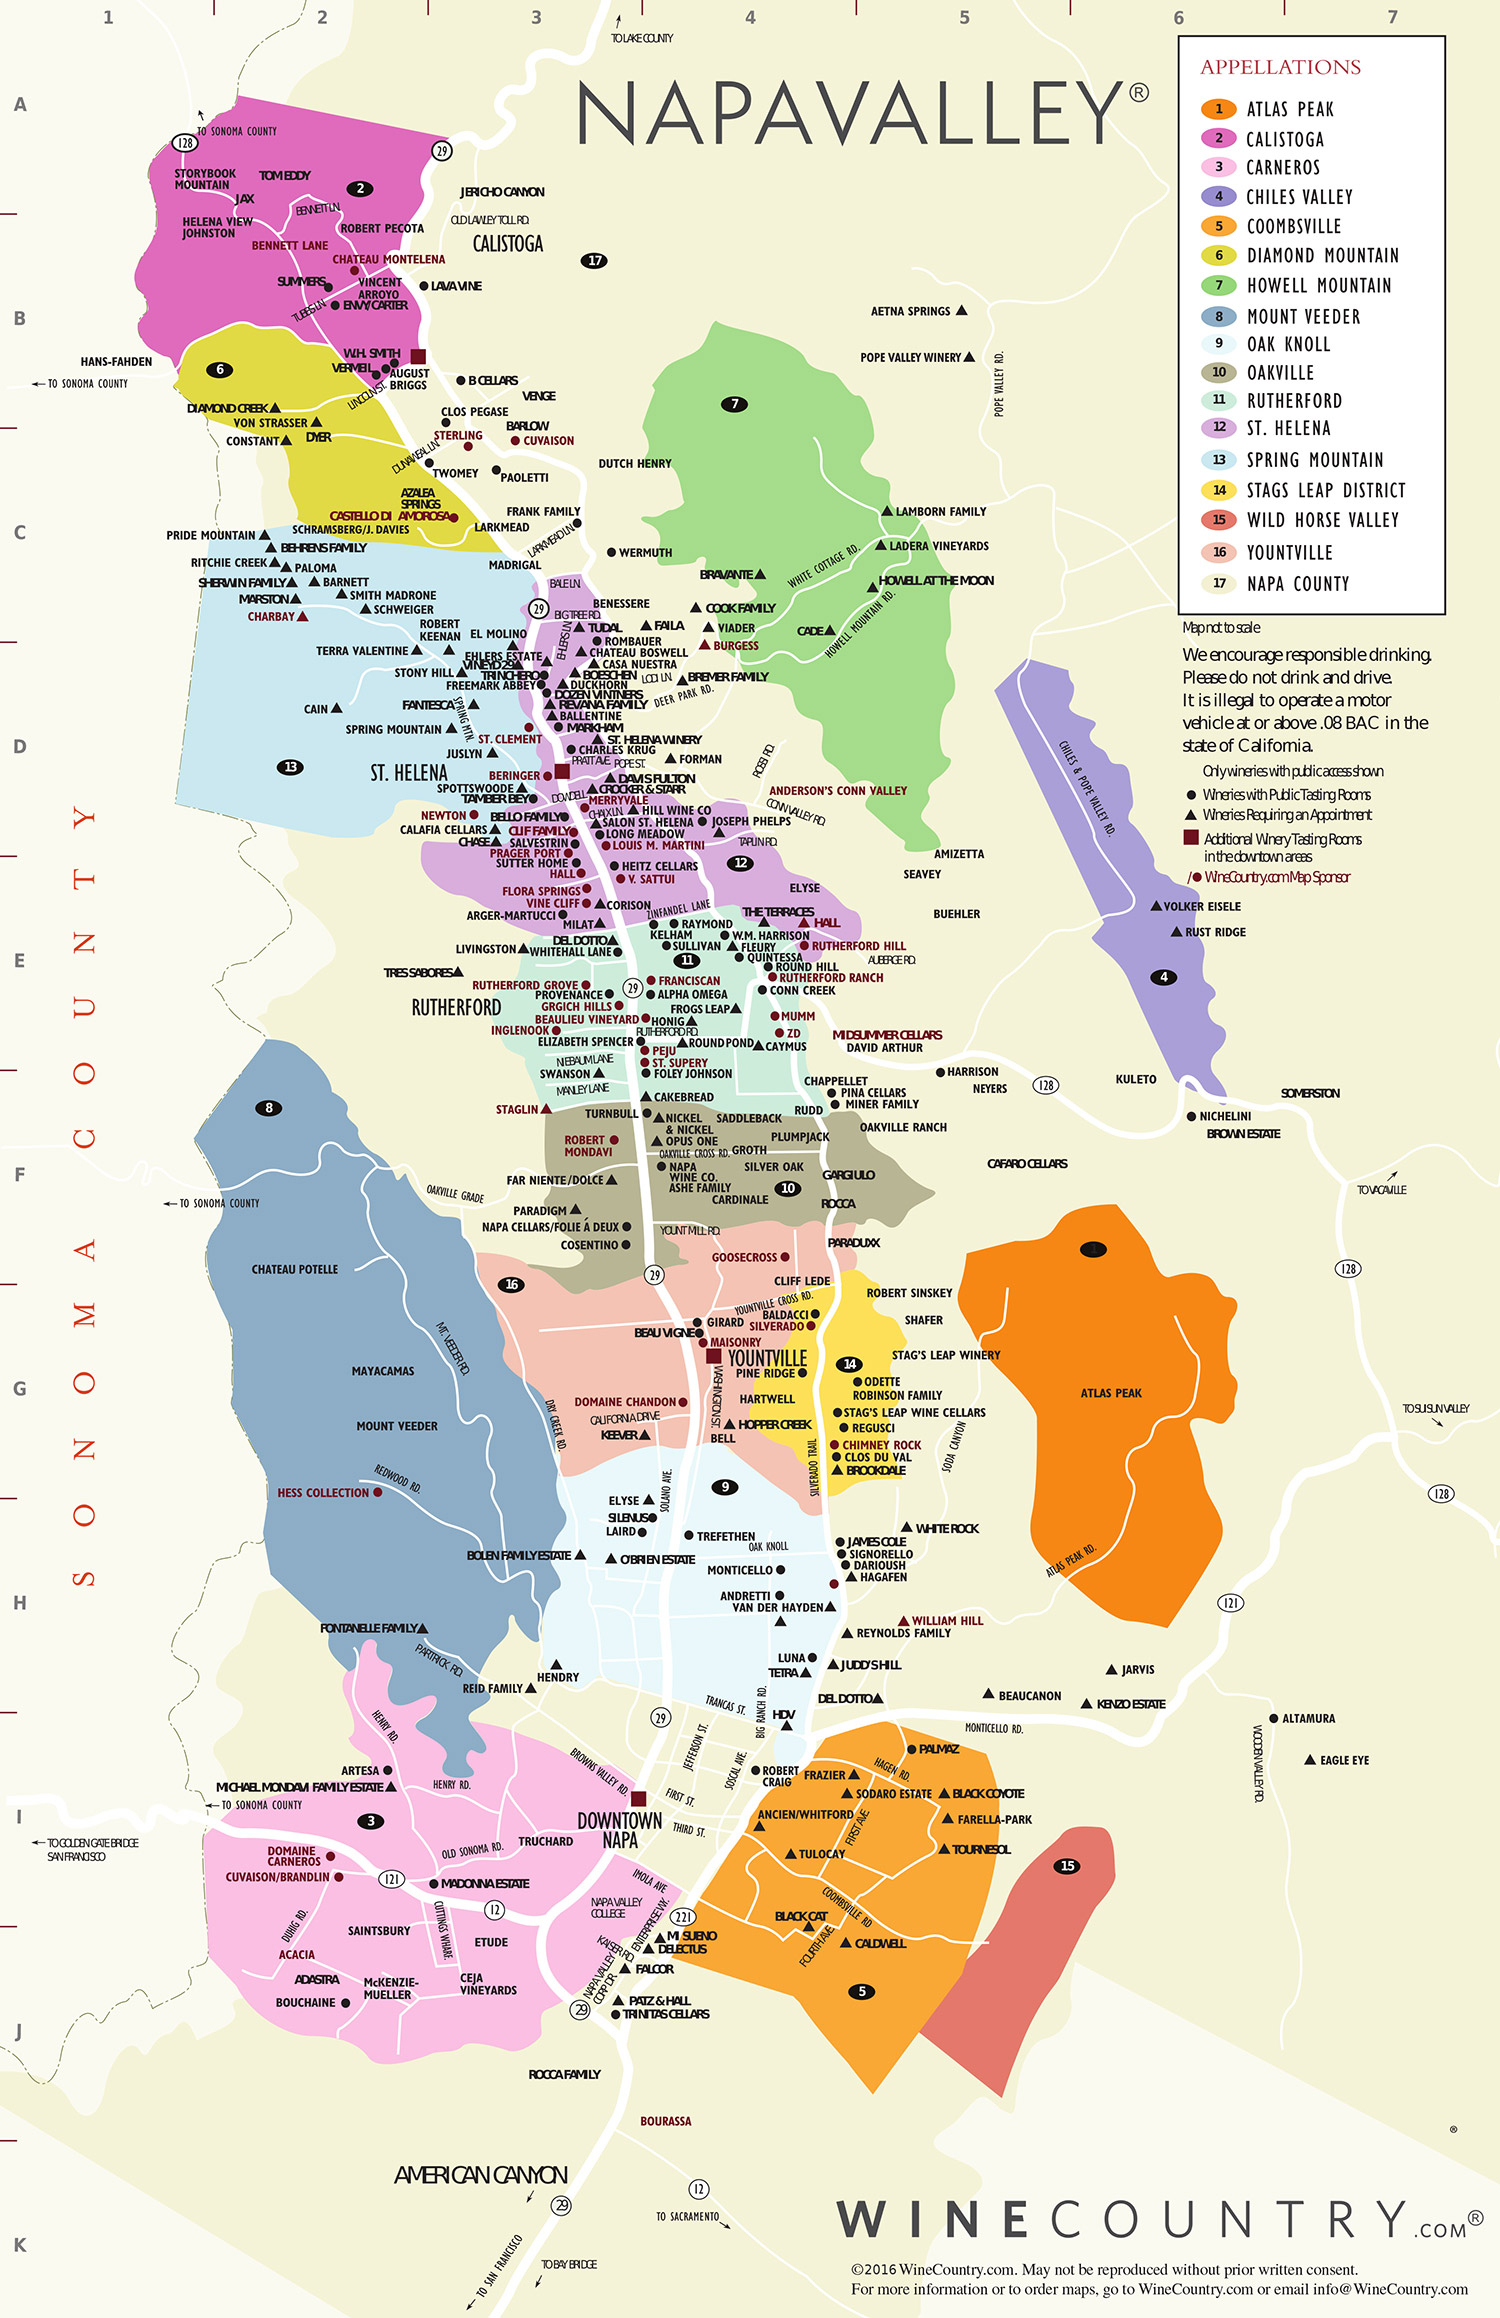 Napa Valley Wine Country Maps - Napavalley - Wine Tasting California Map